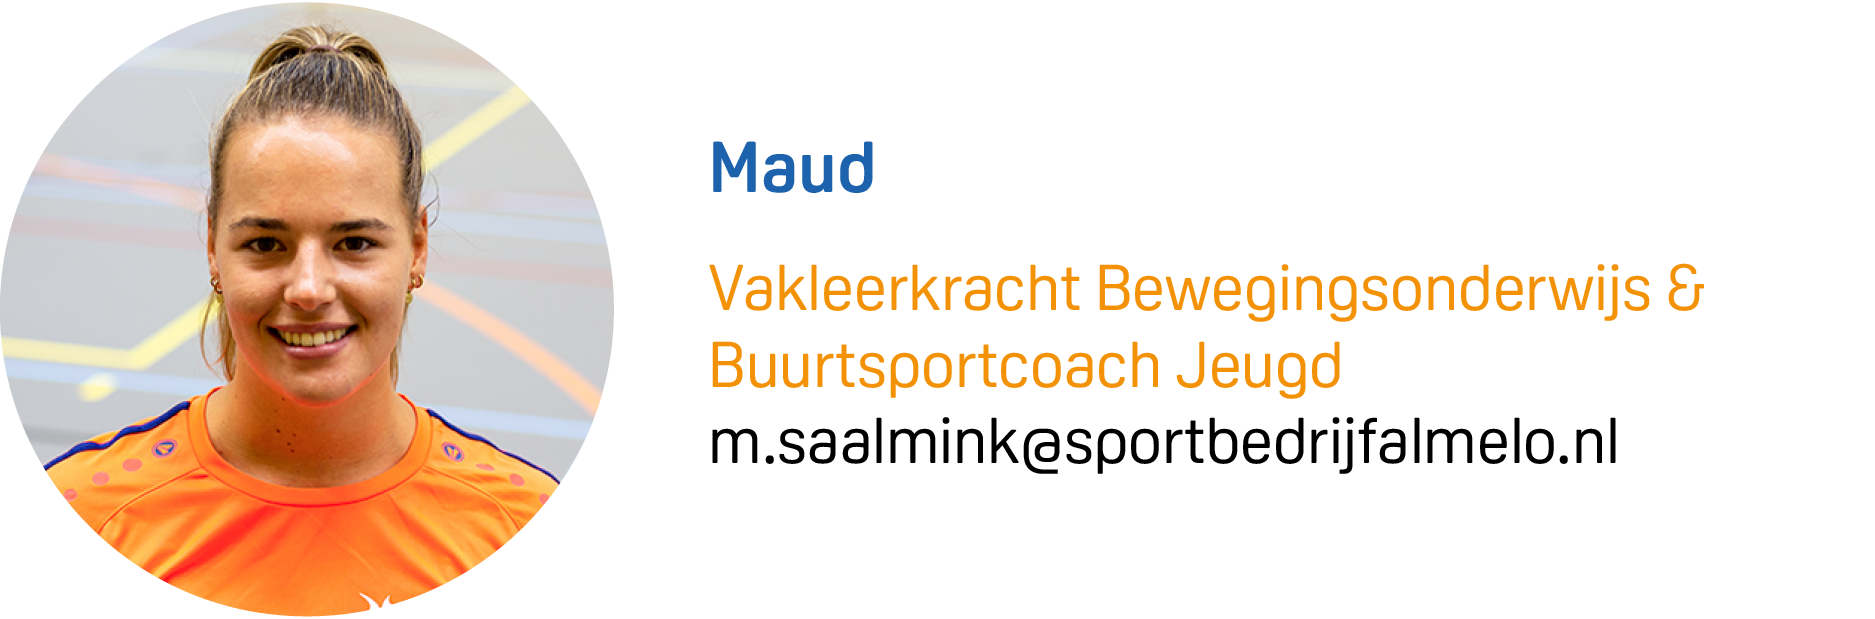 Maud Visite MAIL.png